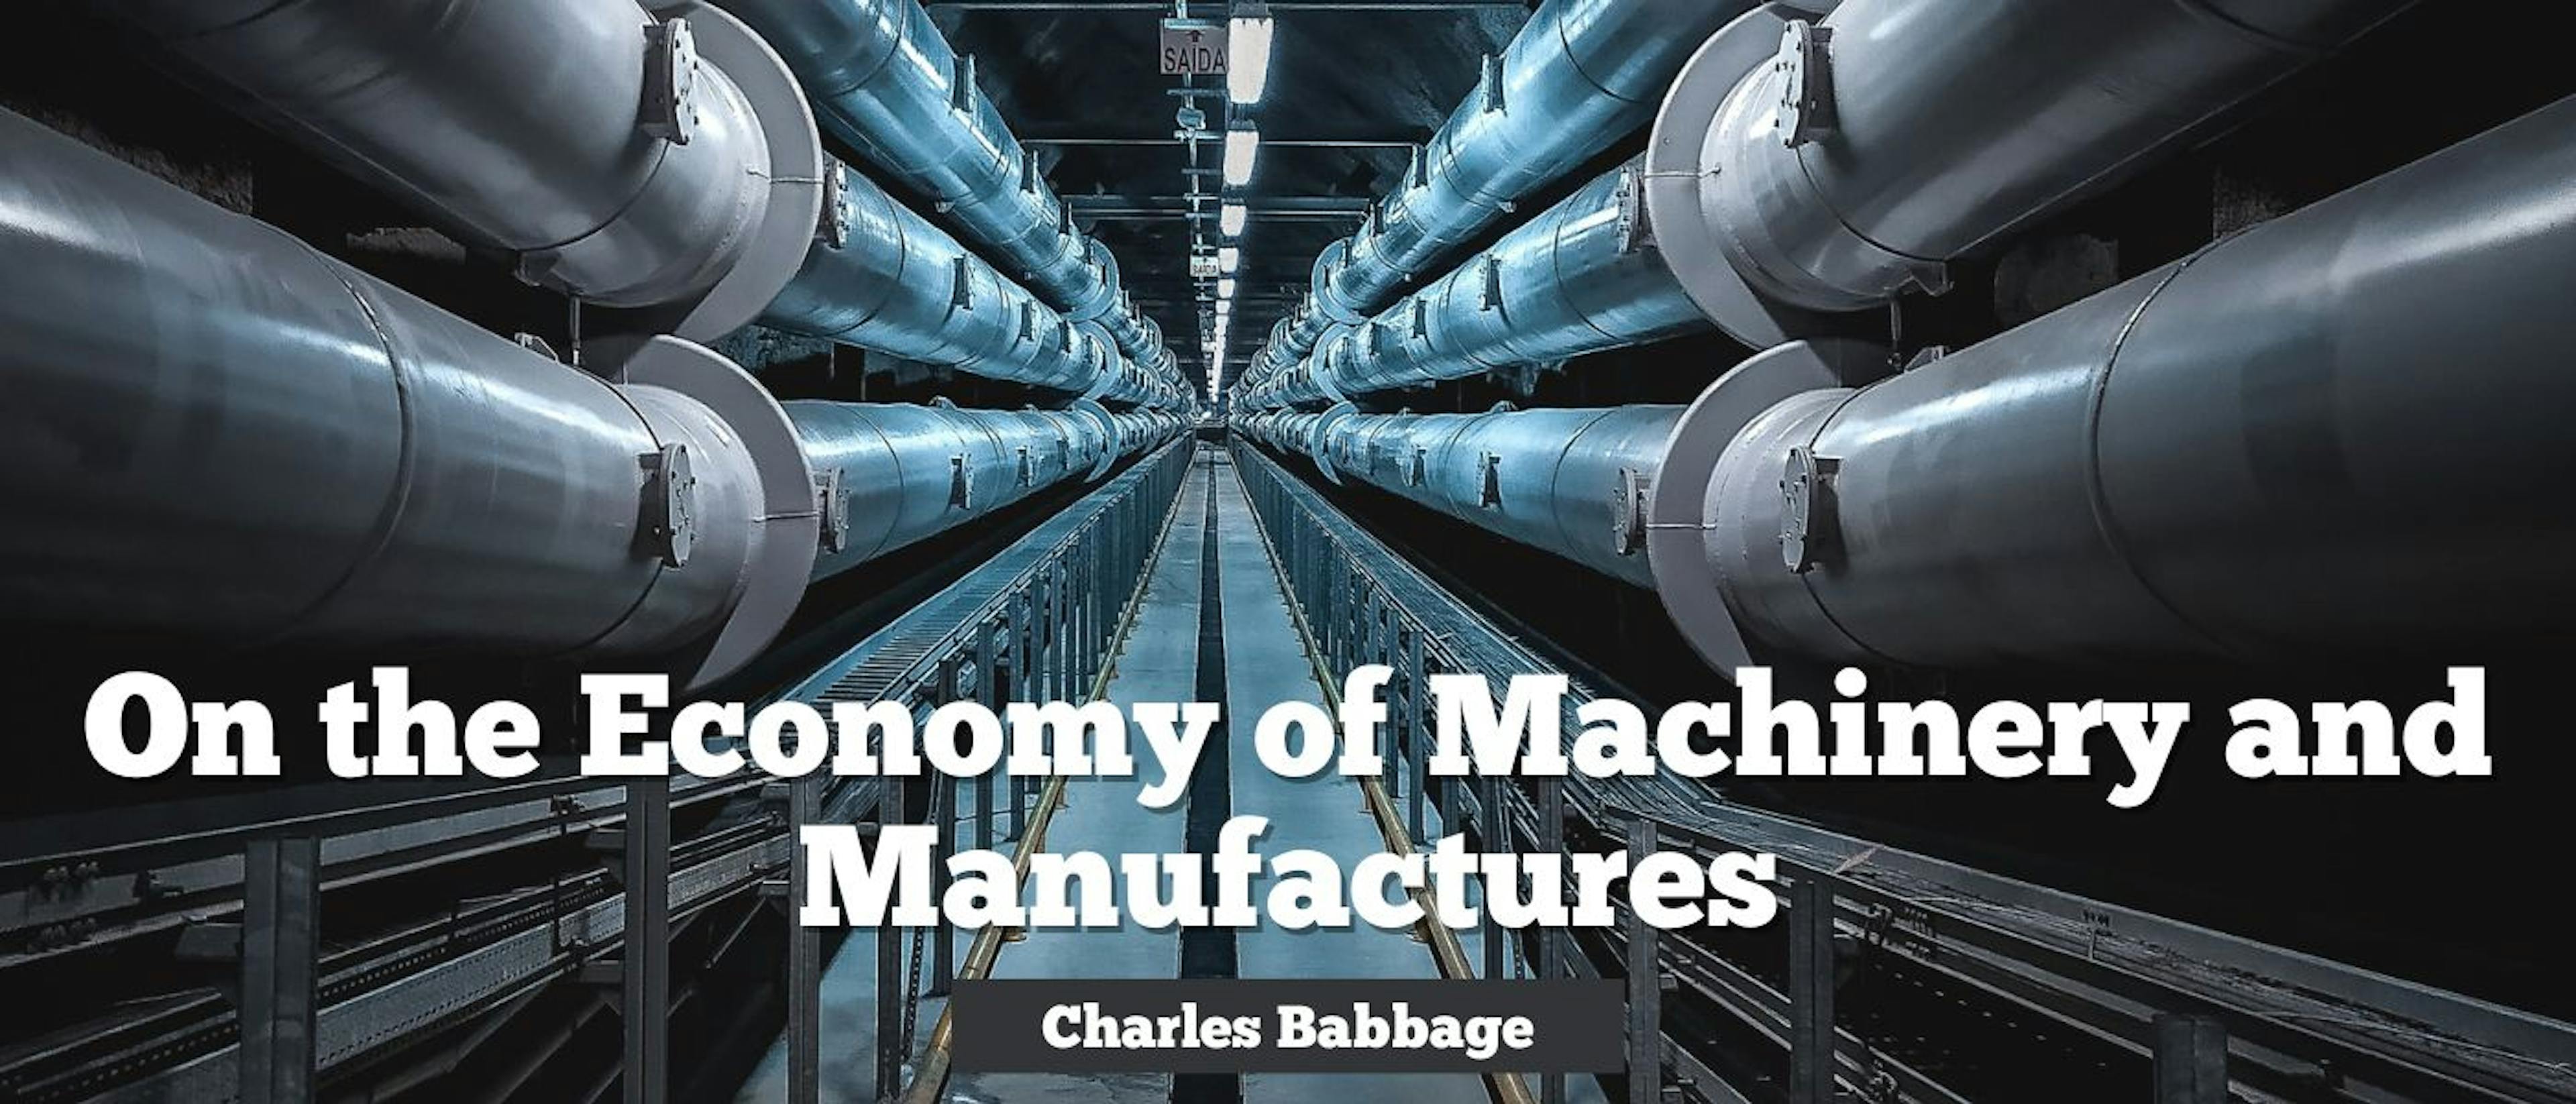 featured image - On the Economy of Machinery and Manufactures by Charles Babbage - Table of Links